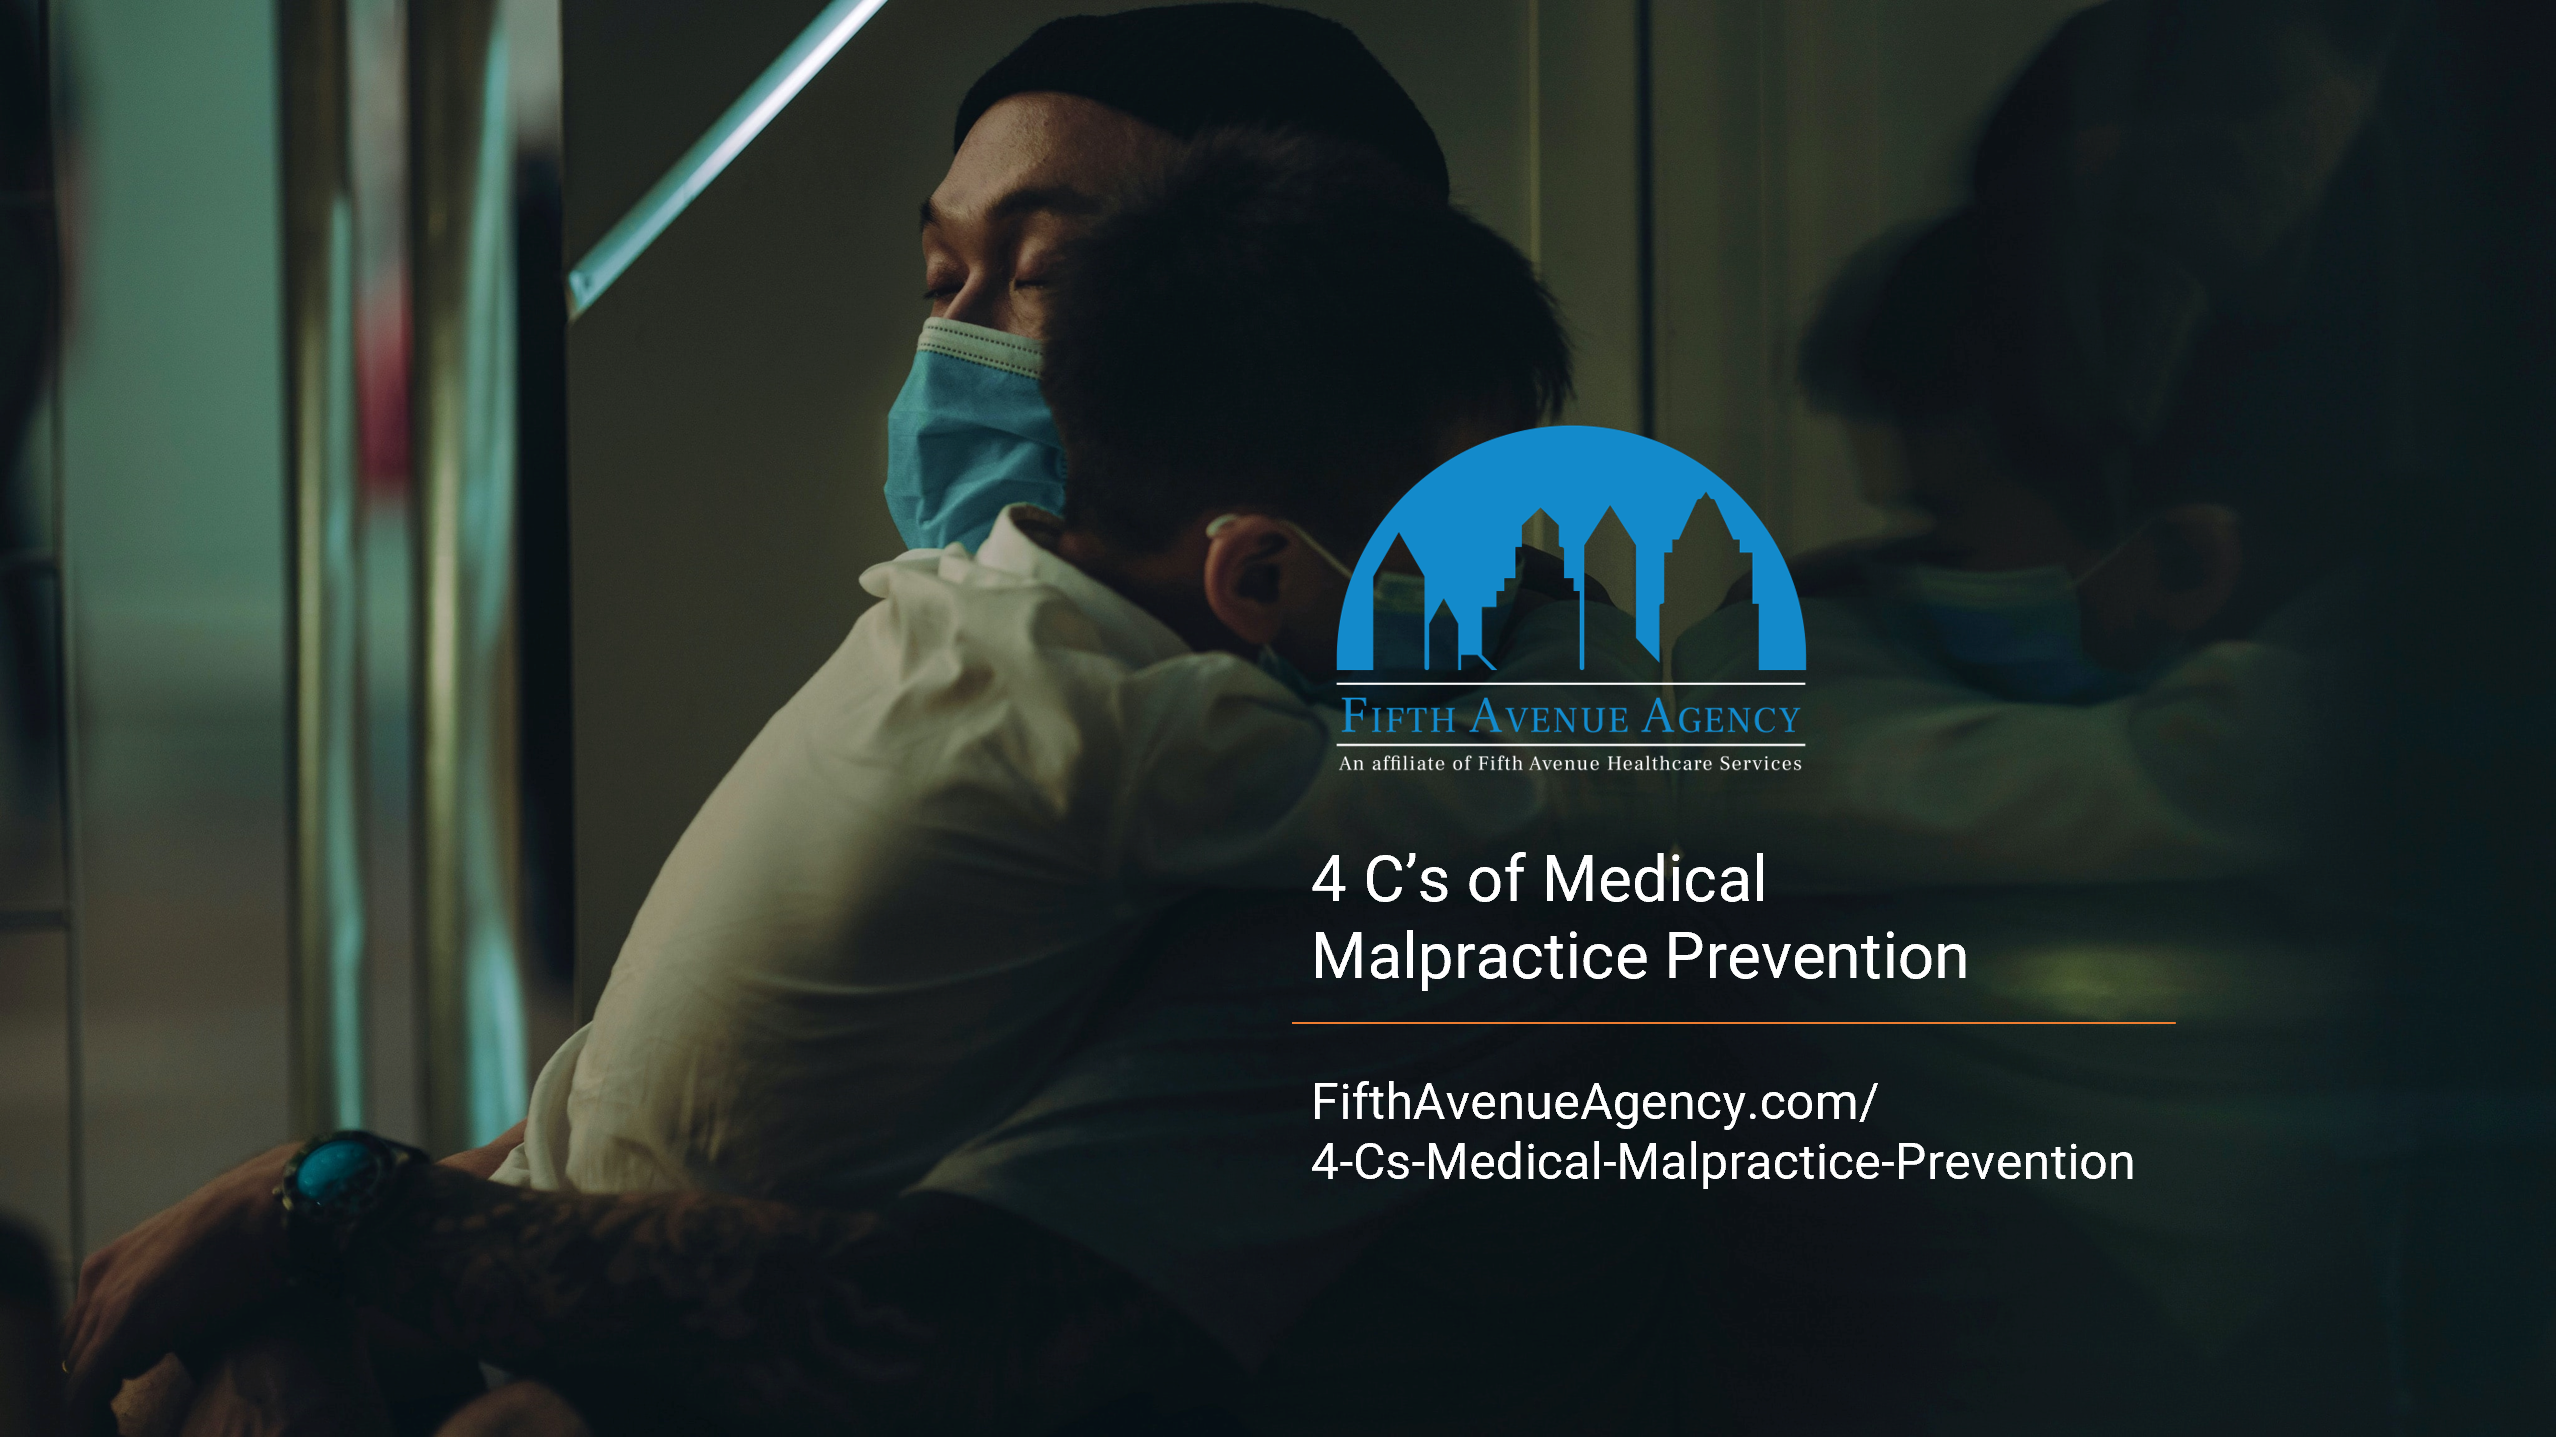 4 Cs of Medical Malpractice Prevention FifthAvenueAgency.com